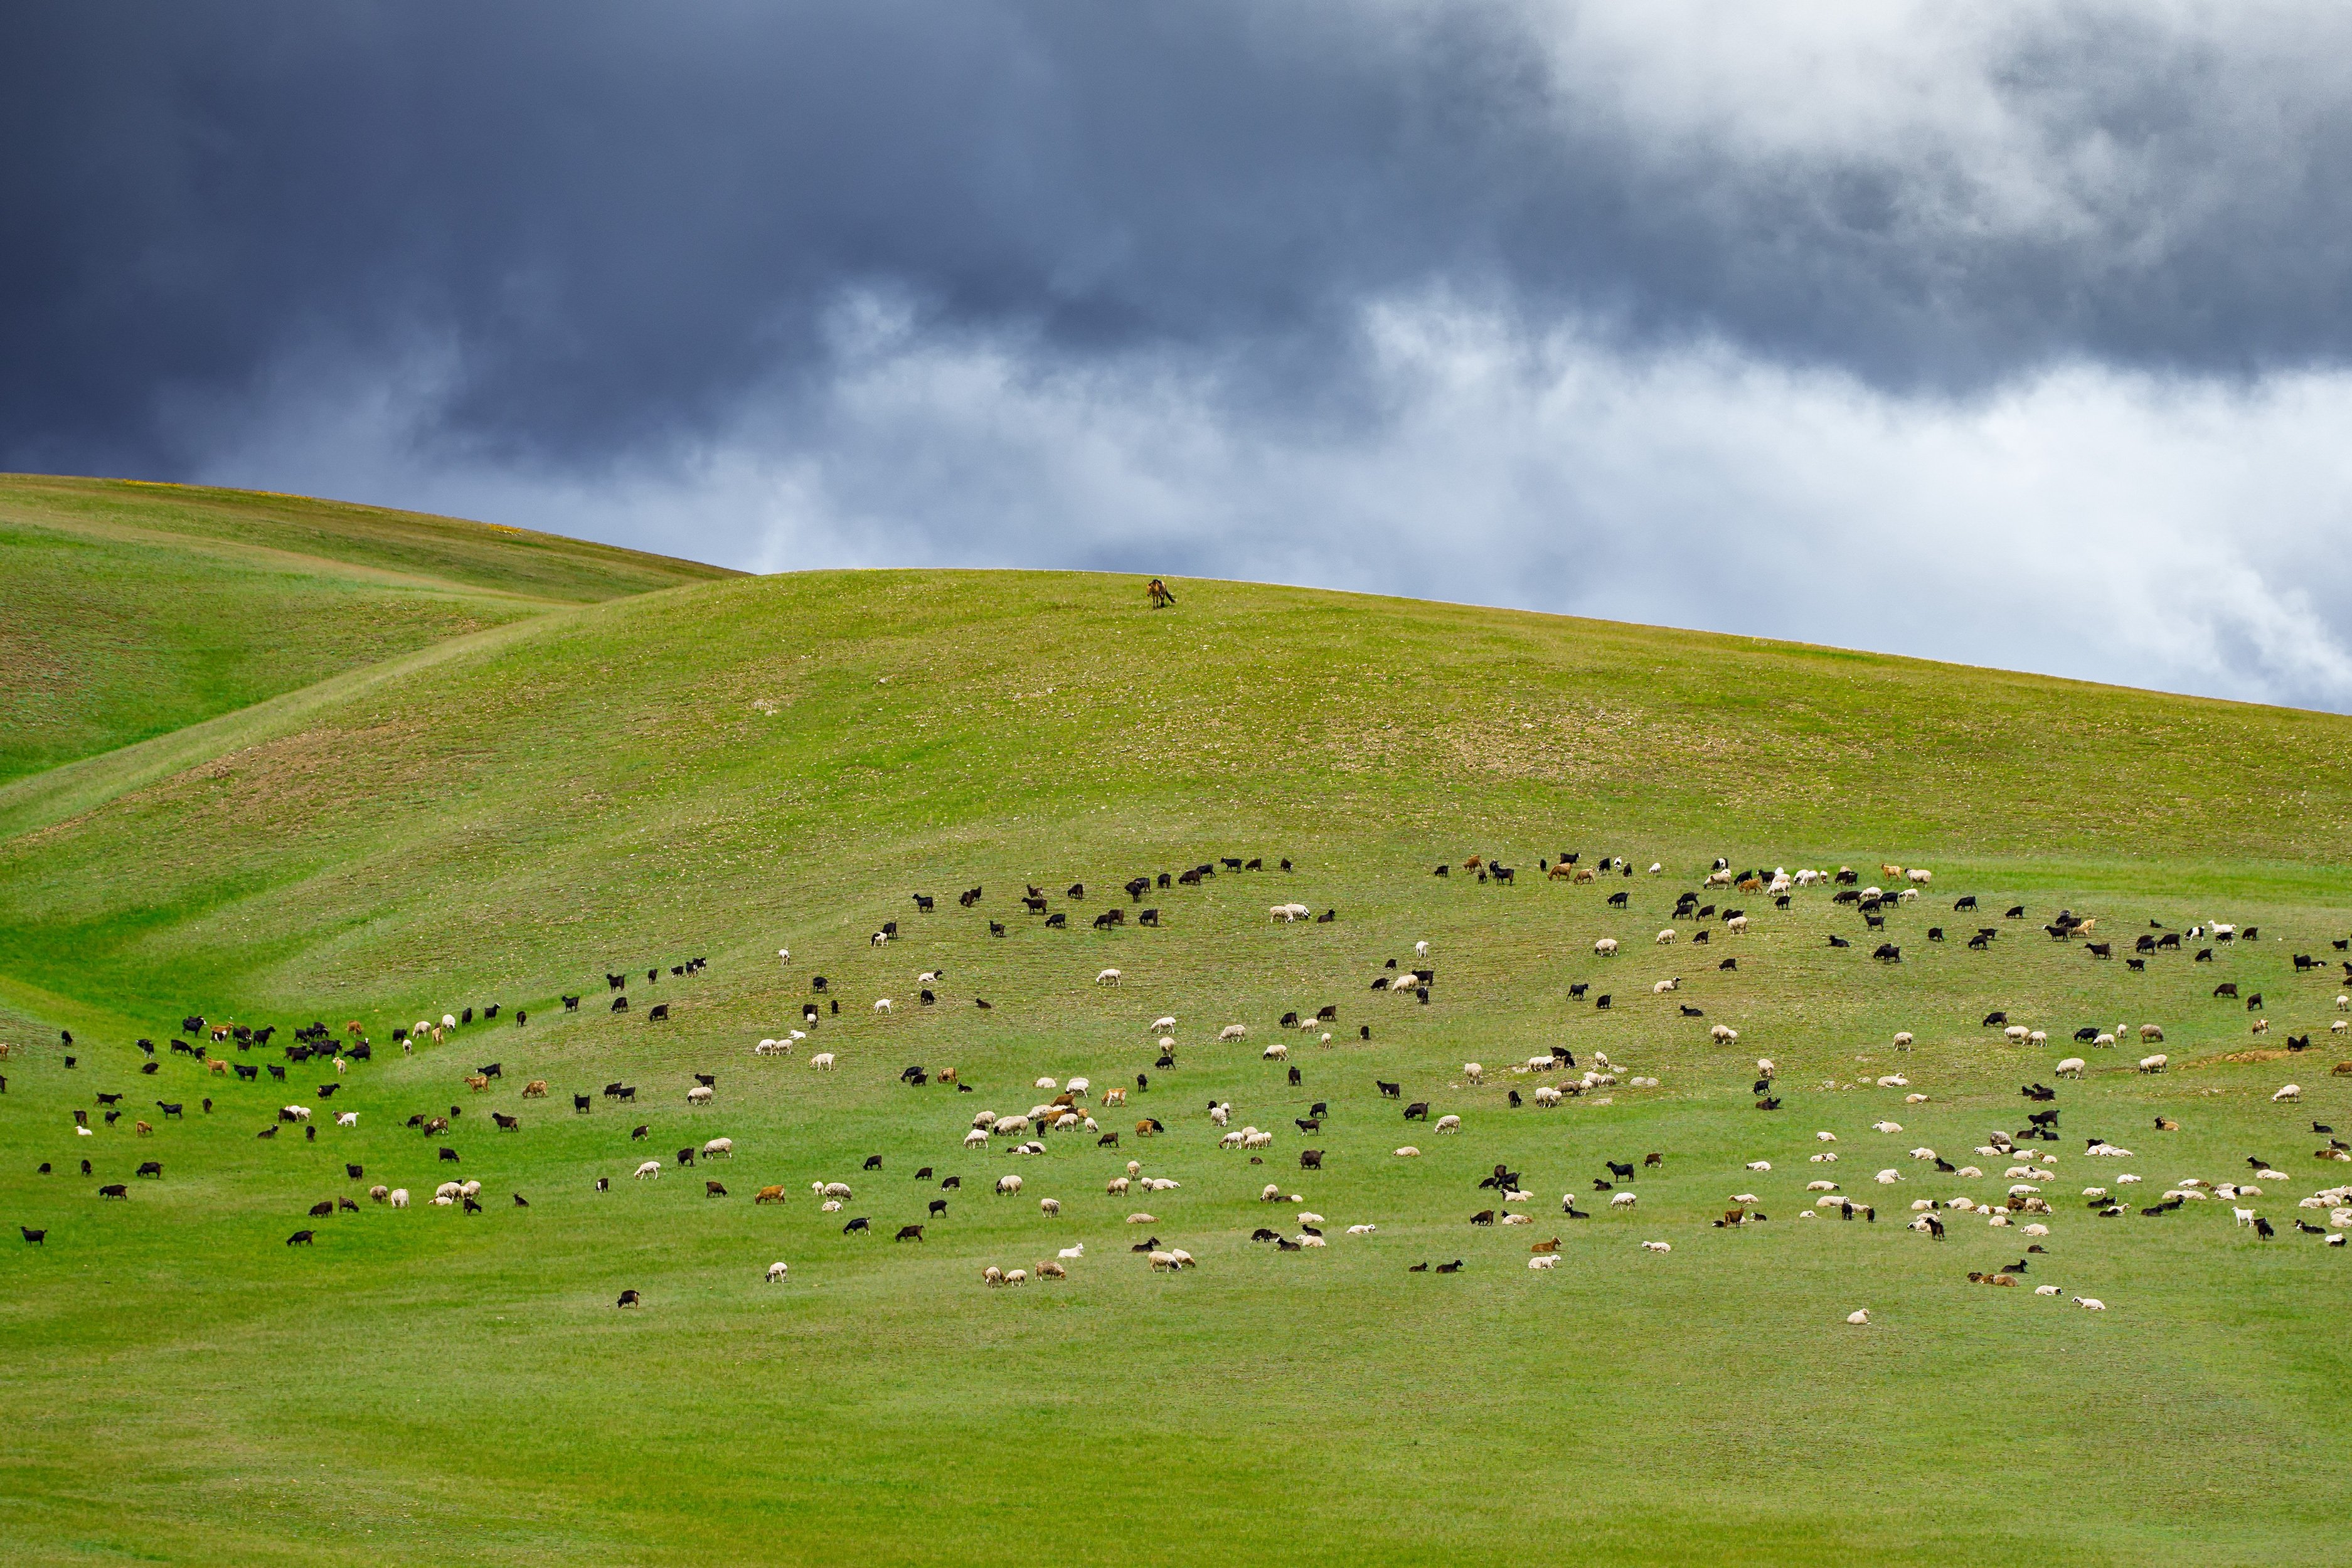 Rolling hills of Casic; a riding shepherd tends to their flock.